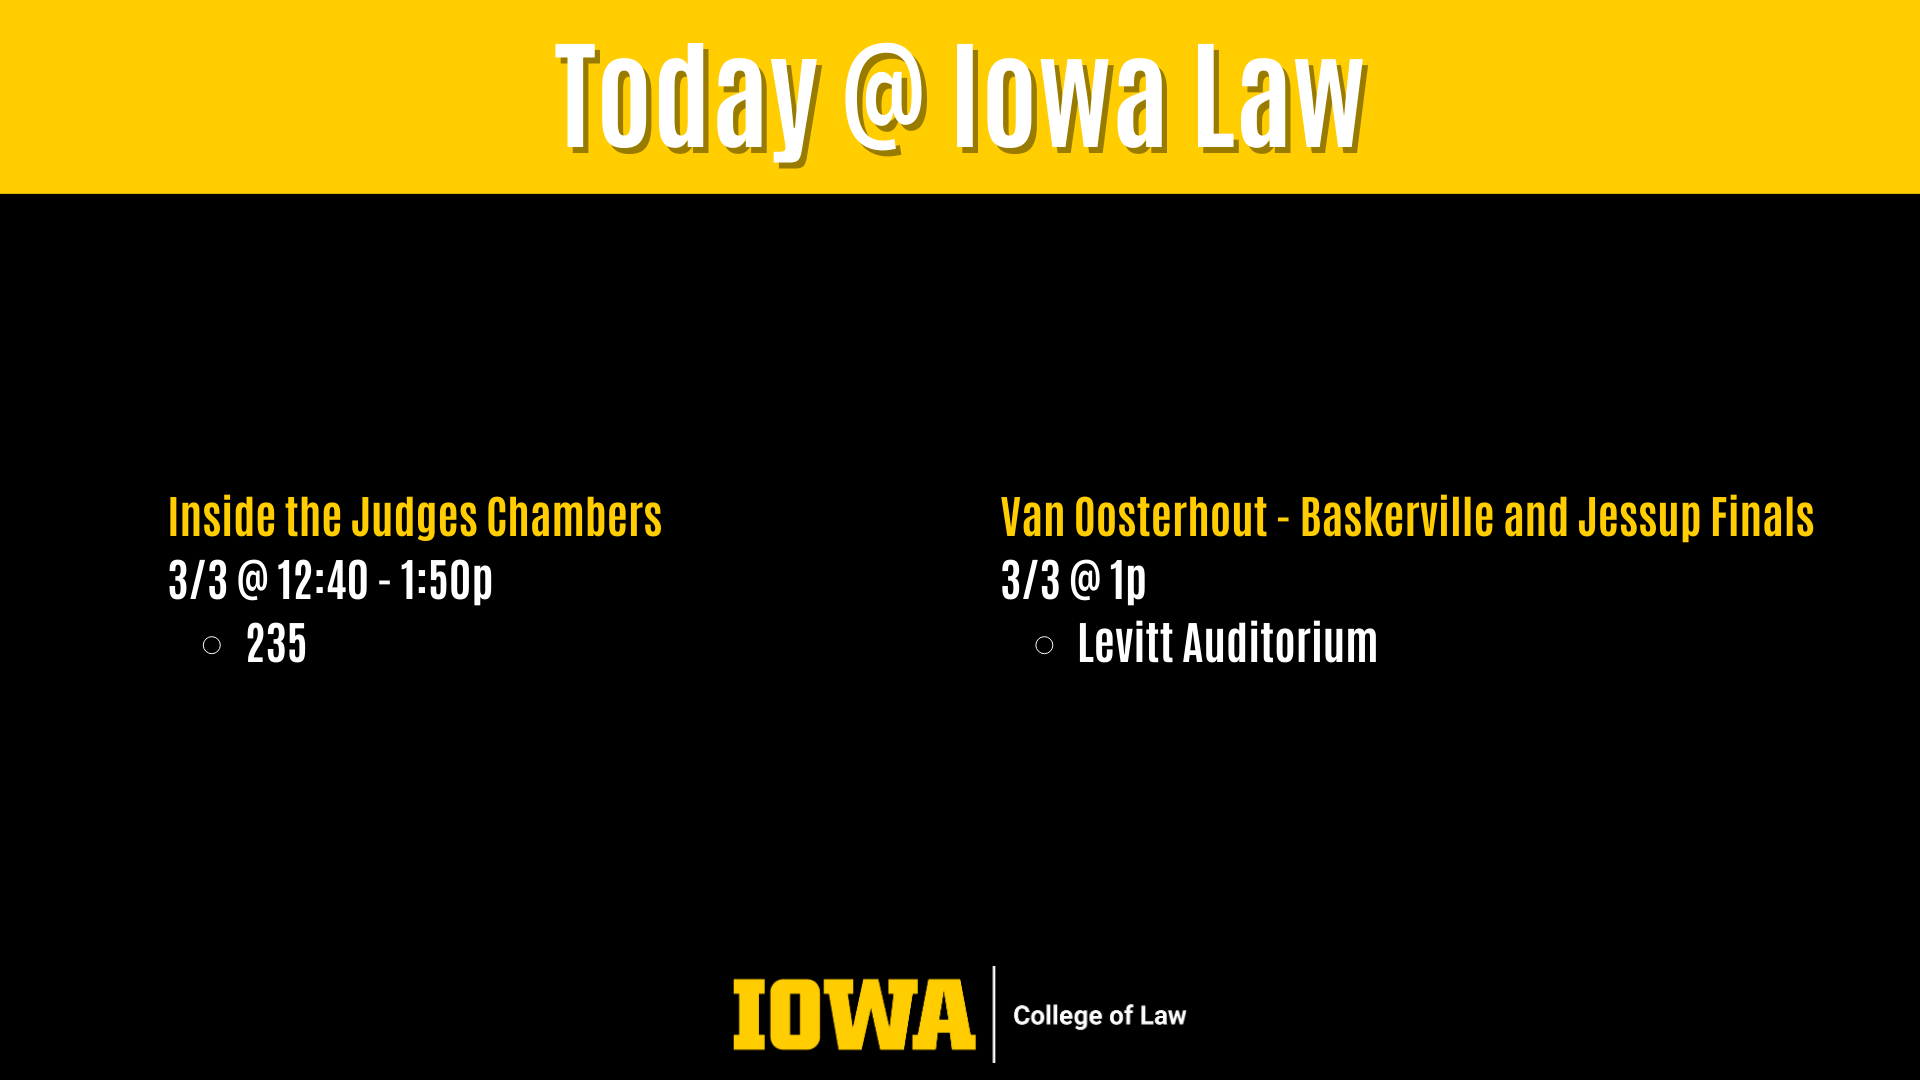 Today @ Iowa Law Inside the Judges Chambers 3/3 @ 12:40 - 1:50p  235 Van Oosterhout - Baskerville and Jessup Finals 3/3 @ 1p Levitt Auditorium